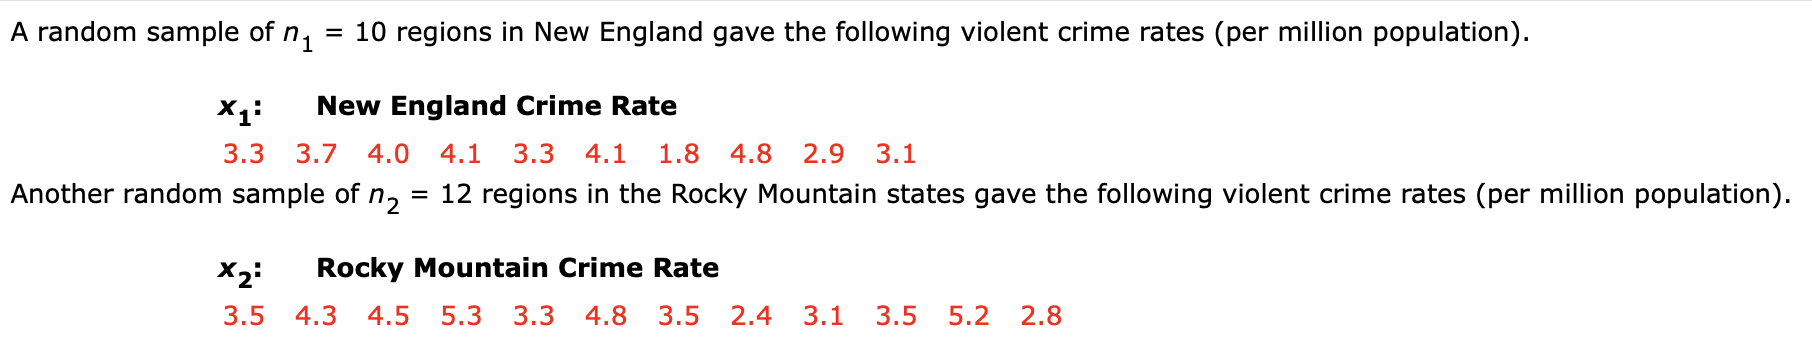 A random sample of n, = 10 regions in New England gave the following violent crime rates (per million population).
х
3.3 3.7 4.0 4.1 3.3 4.1 1.8 4.8 2.9 3.1
New England Crime Rate
Another random sample of n, = 12 regions in the Rocky Mountain states gave the following violent crime rates (per million population).
X2:
3.5 4.3 4.5 5.3 3.3 4.8
Rocky Mountain Crime Rate
3.5 2.4 3.1 3.5
5.2 2.8
